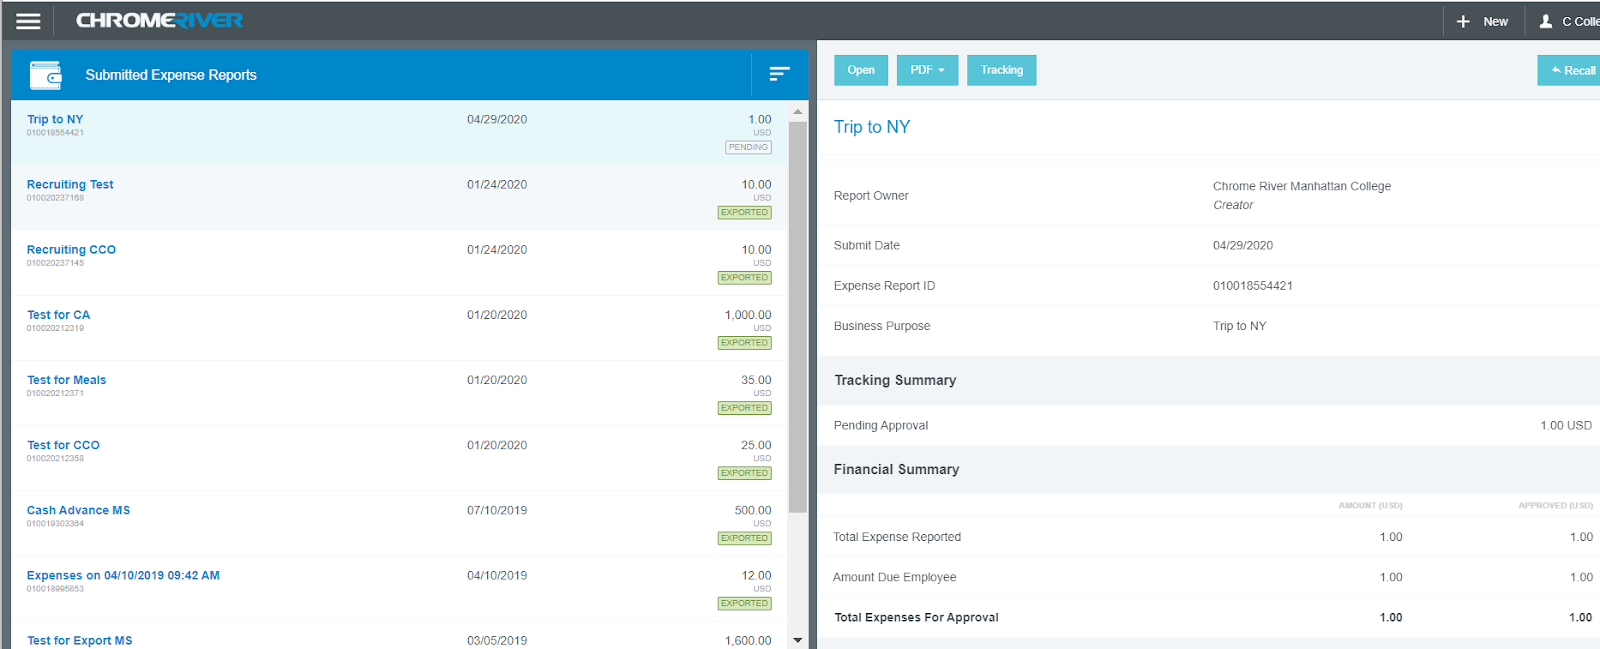 Screen shot of Submitted Expense Reports dashboard showing all the expense reports submitted in your account with an individual report opened on the right hand side of the screen.